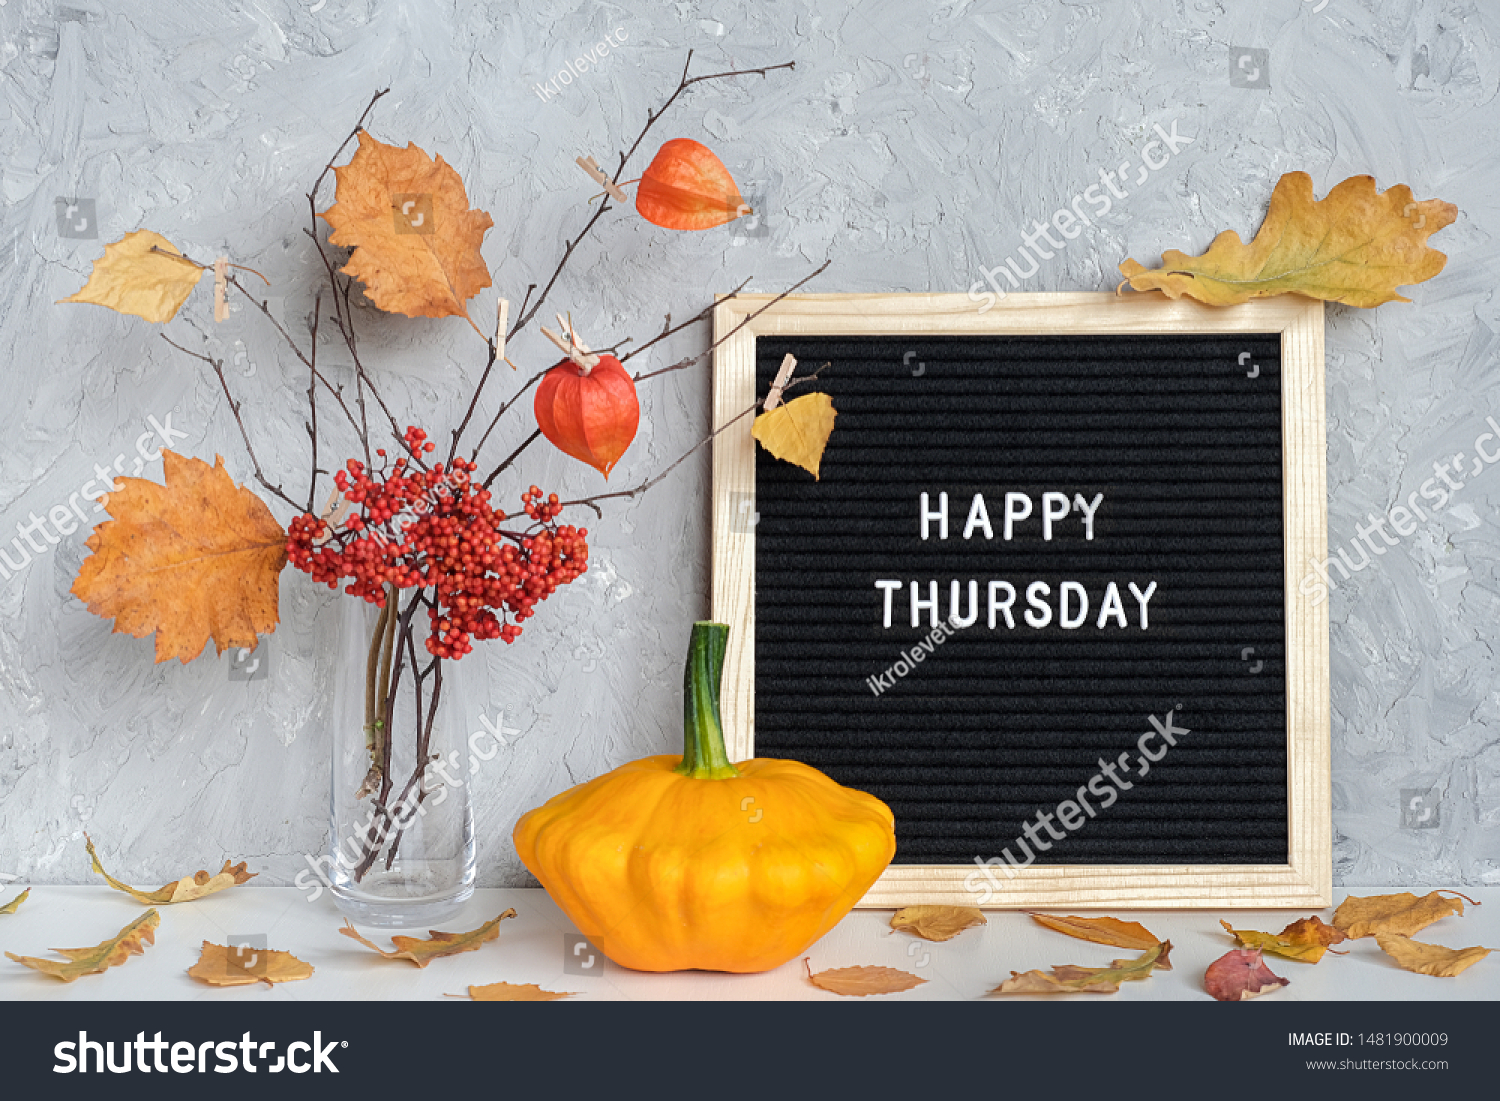 Happy Thursday text on black letter board and bouquet of branches with yellow leaves on clothespins in vase on table Template for postcard, greeting card Concept Hello autumn Thursday. #1481900009